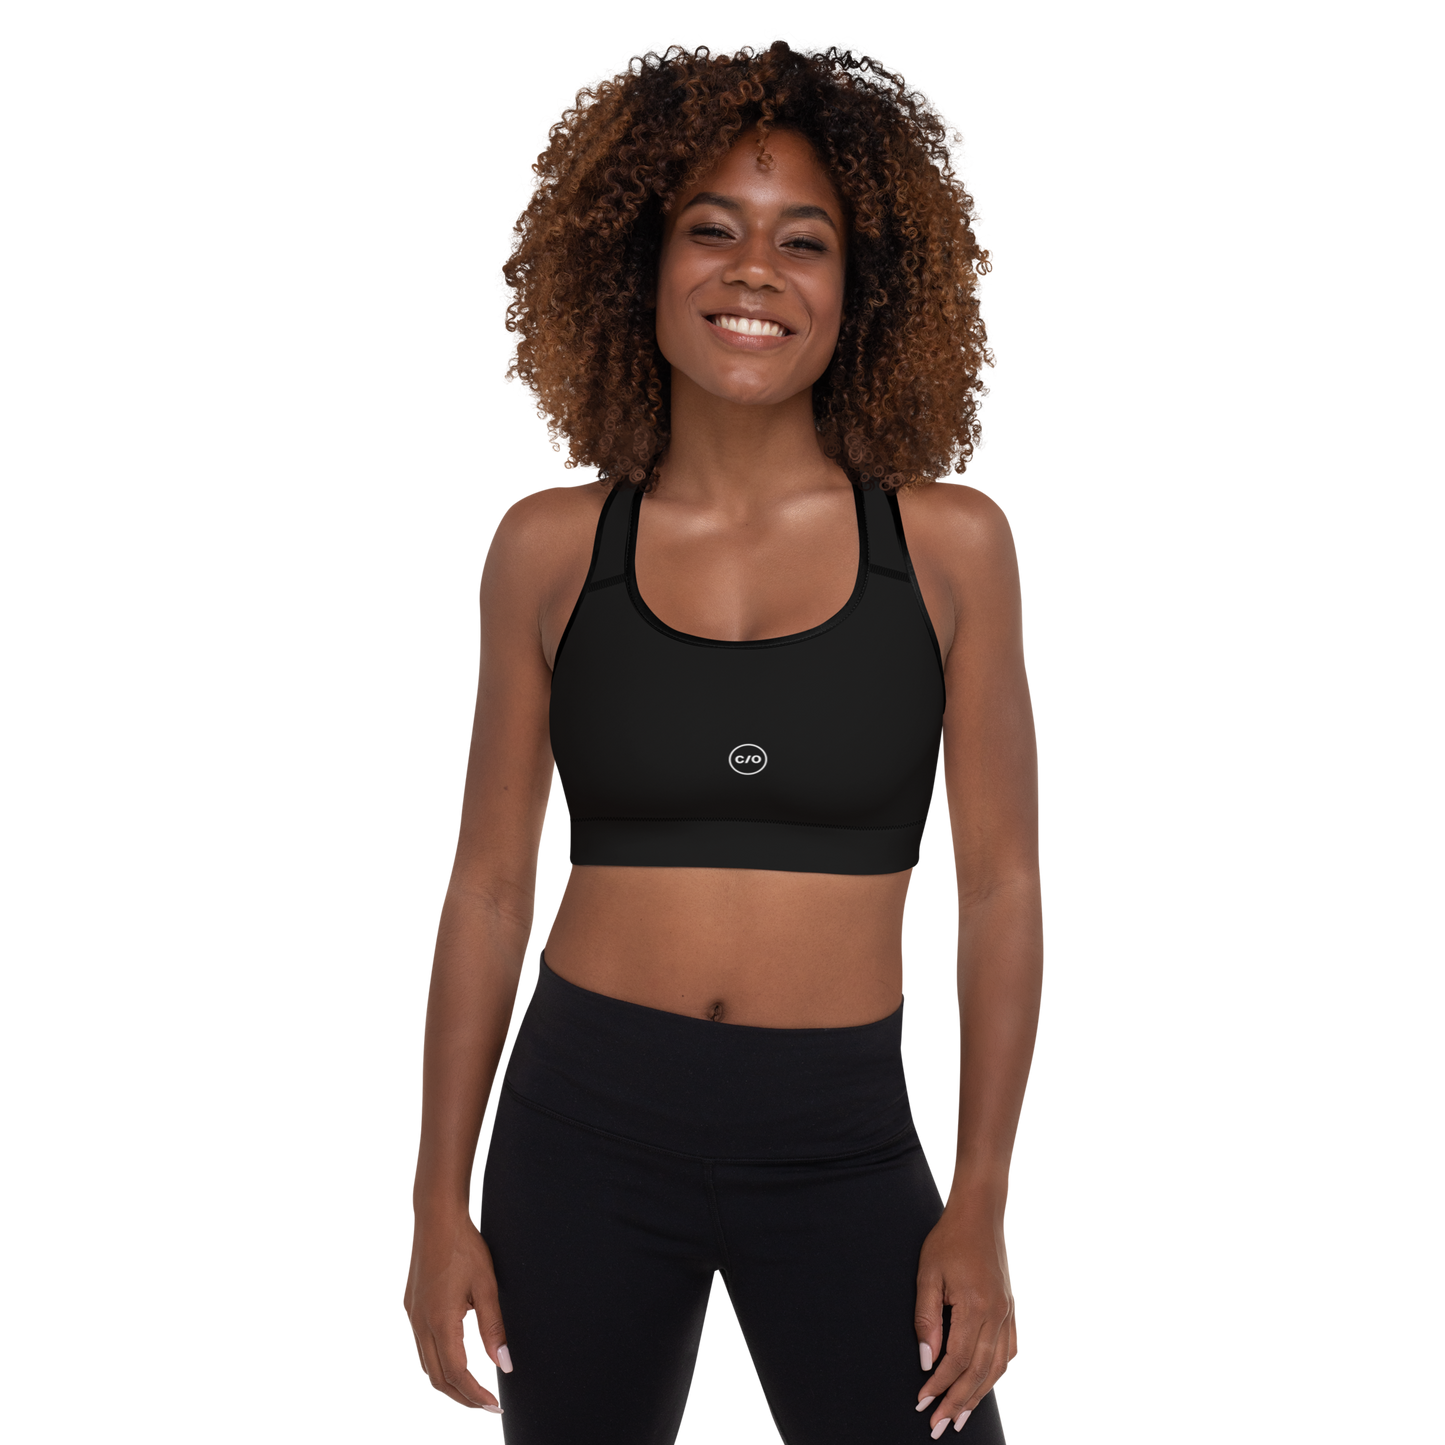 Woman wears Neue Supply Co. Essential Padded Sports Bra in Black. Front view of model smiling and looking directly into camera.